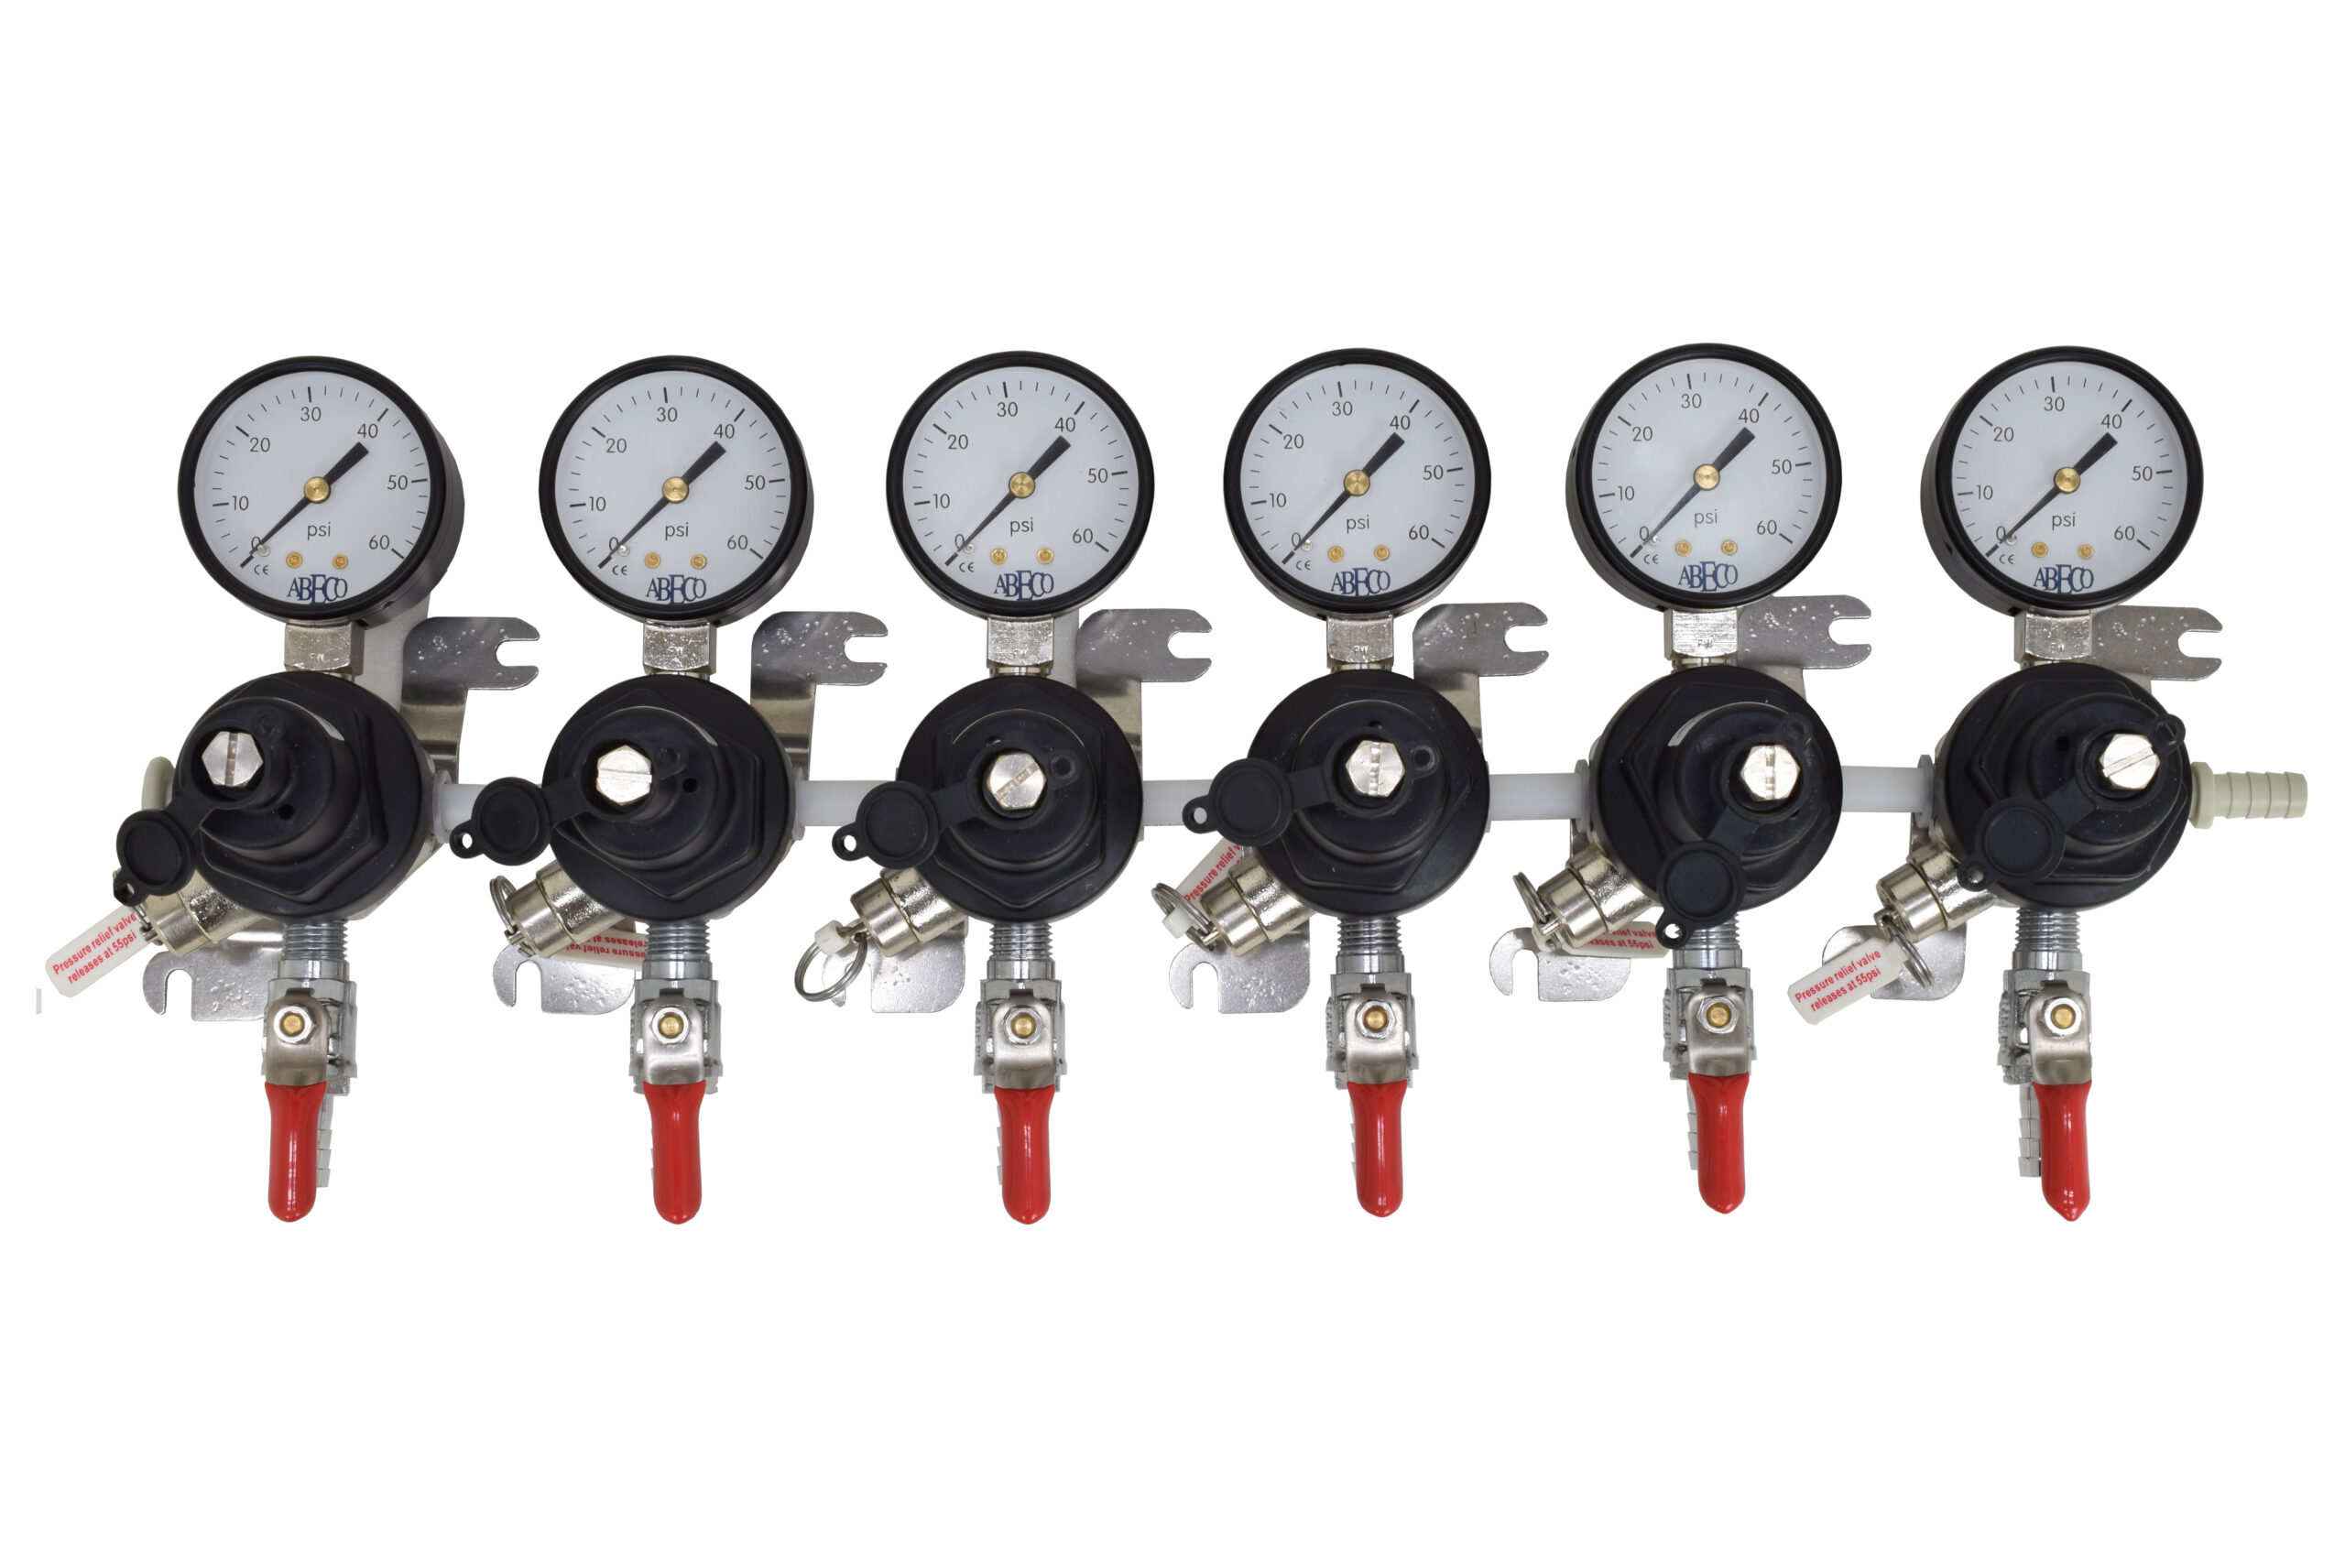 2706 Six TecFlo Secondary Regulator With Your Choice of Push In Fittings and 3/8" OD Poly Unions